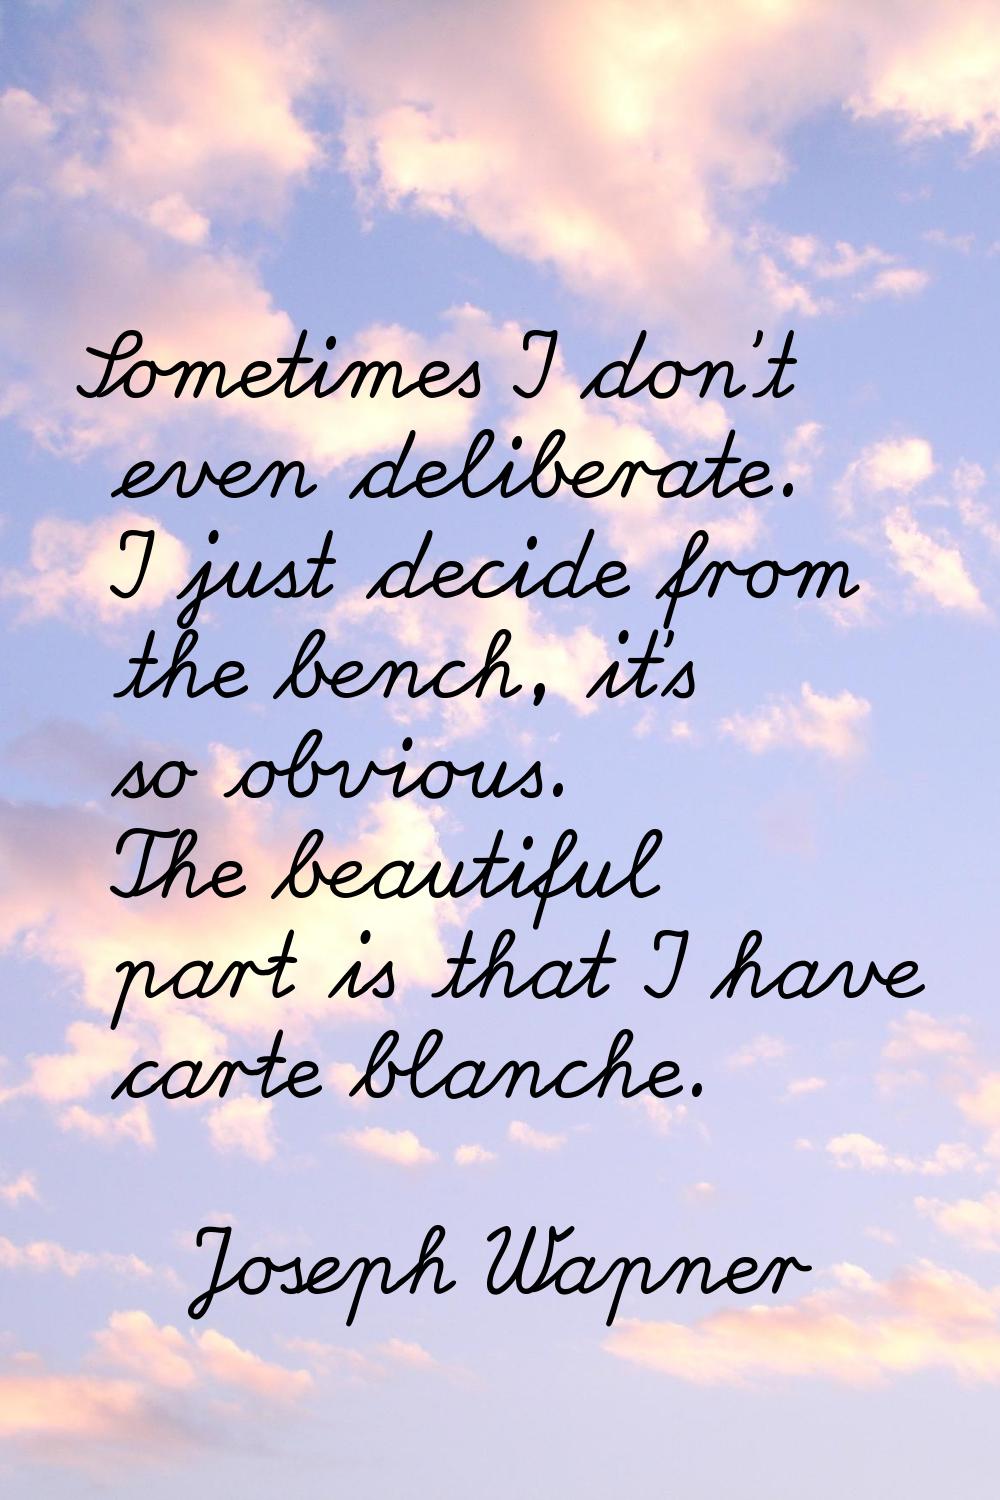 Sometimes I don't even deliberate. I just decide from the bench, it's so obvious. The beautiful par